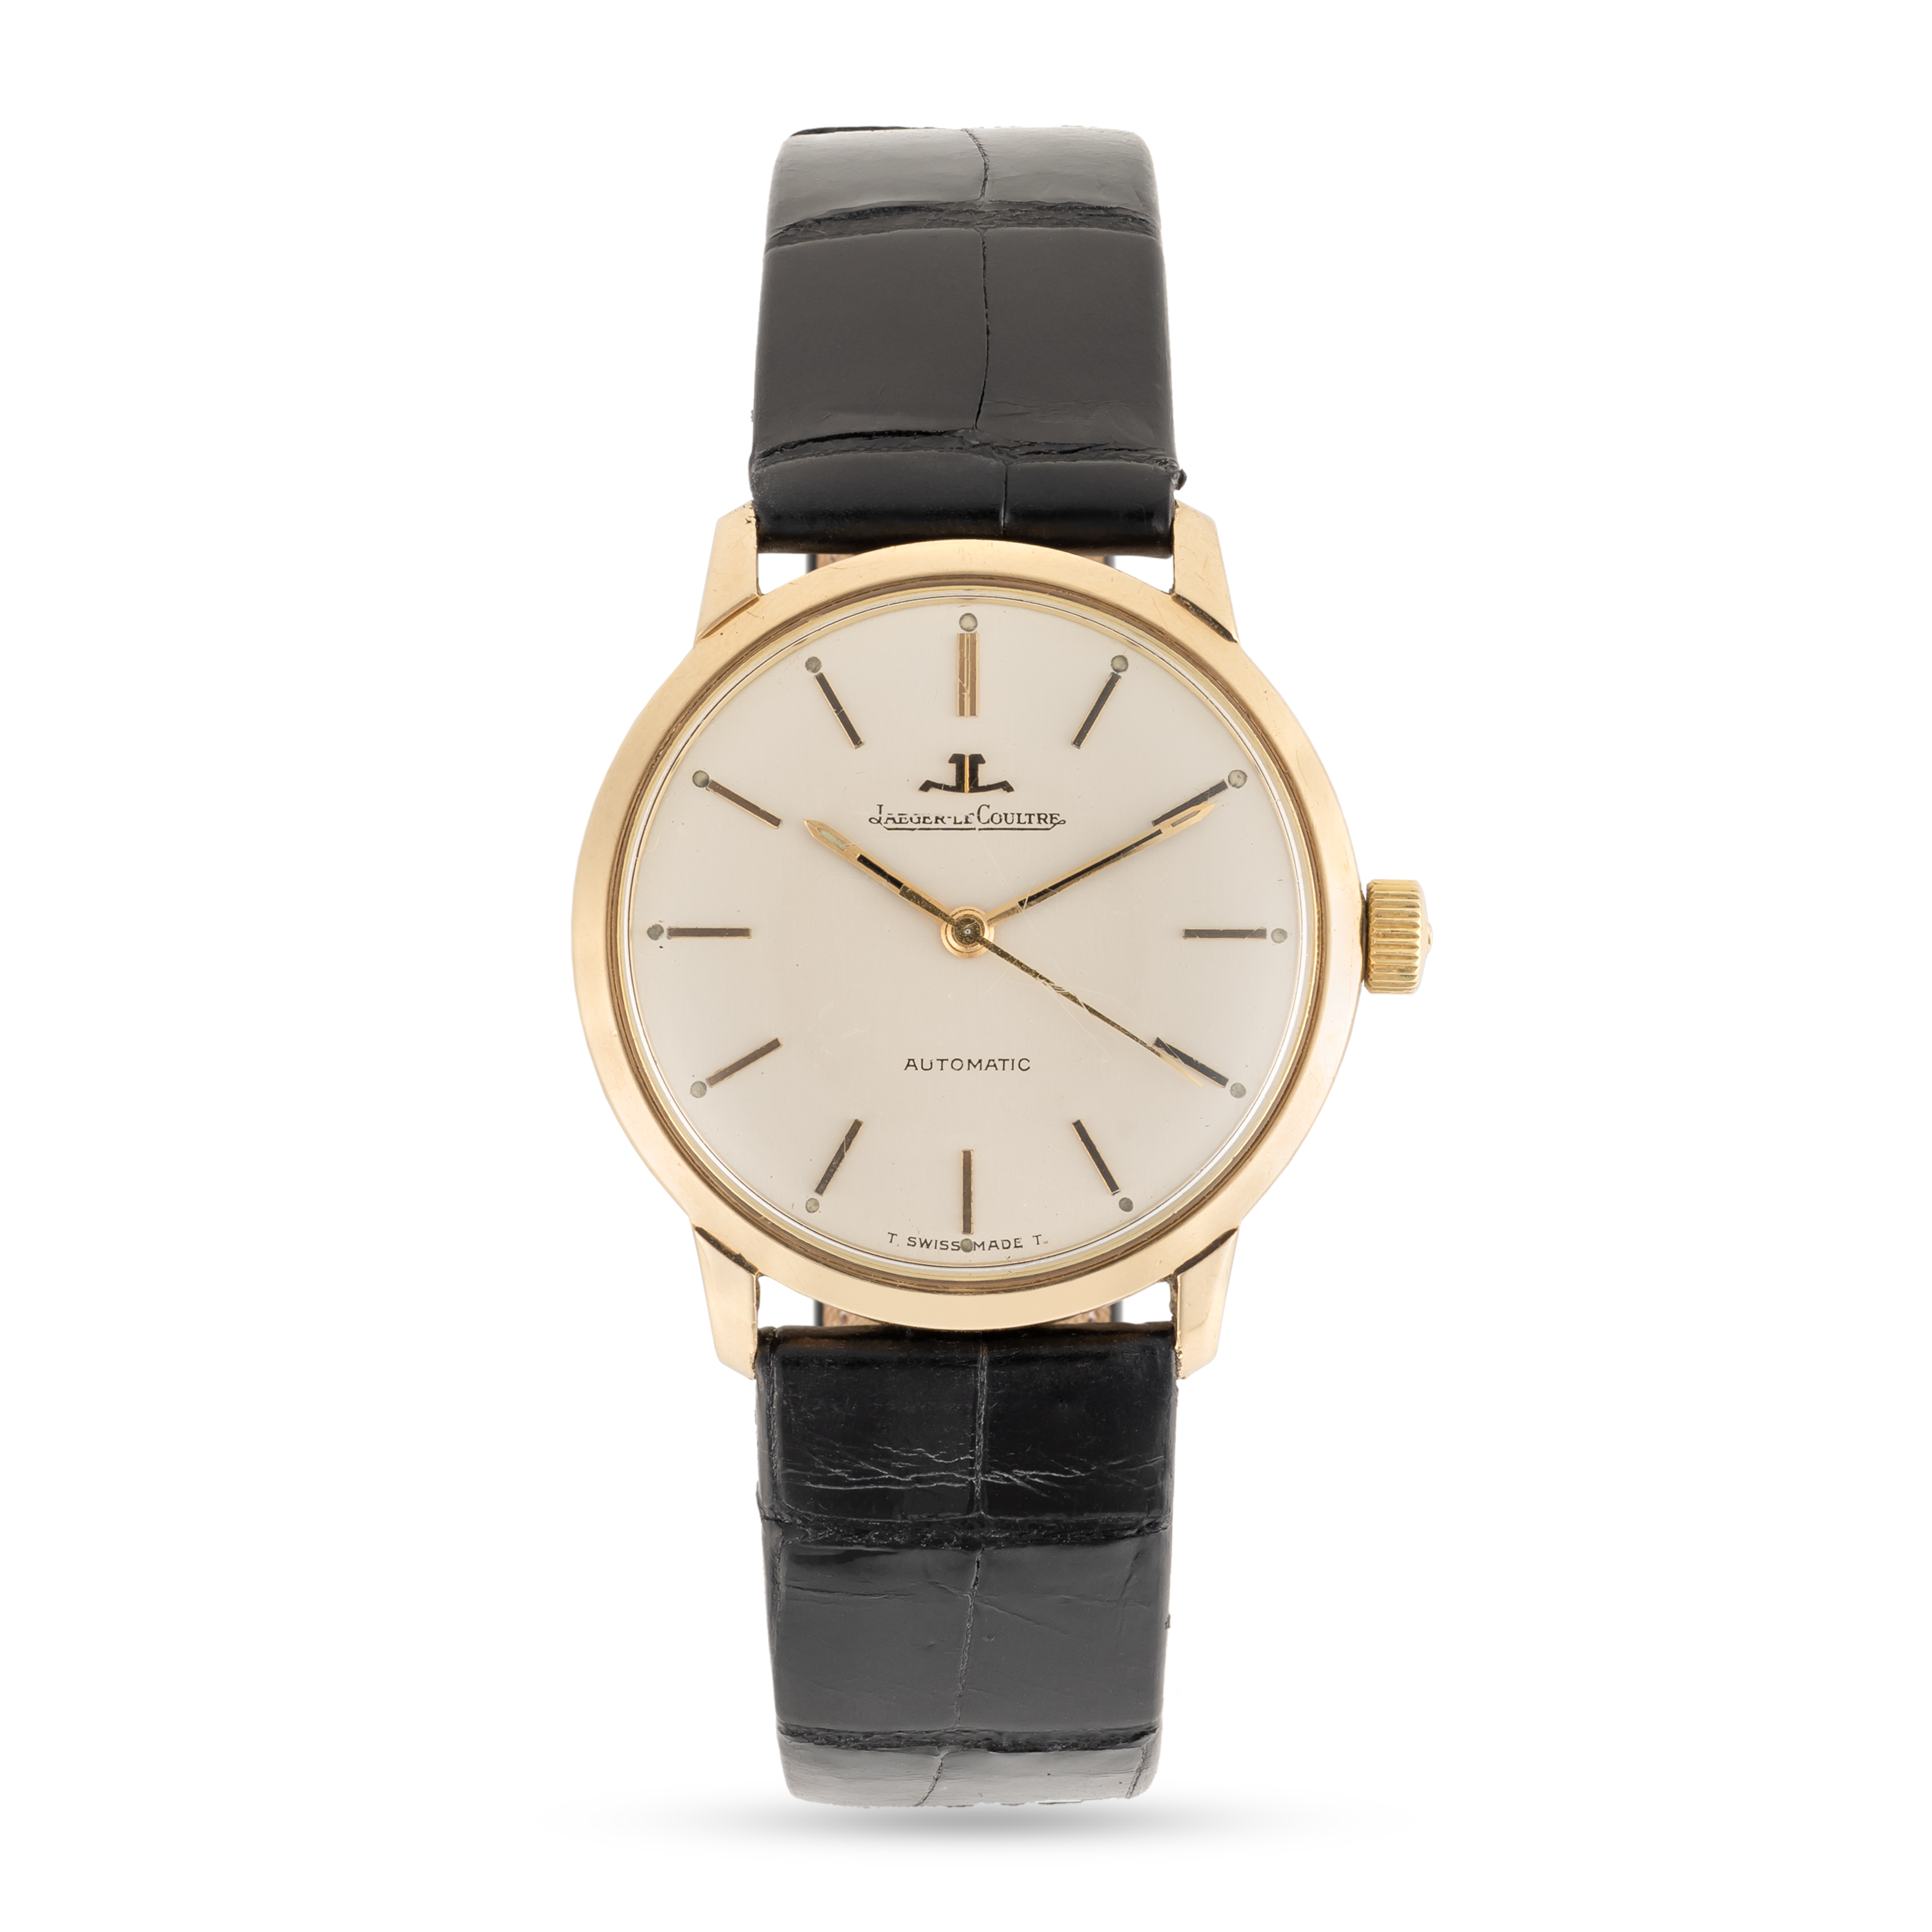 A GENTLEMAN'S SIZE 9CT SOLID GOLD JAEGER LECOULTRE AUTOMATIC WRIST WATCH CIRCA 1960s Movement: - Image 2 of 7